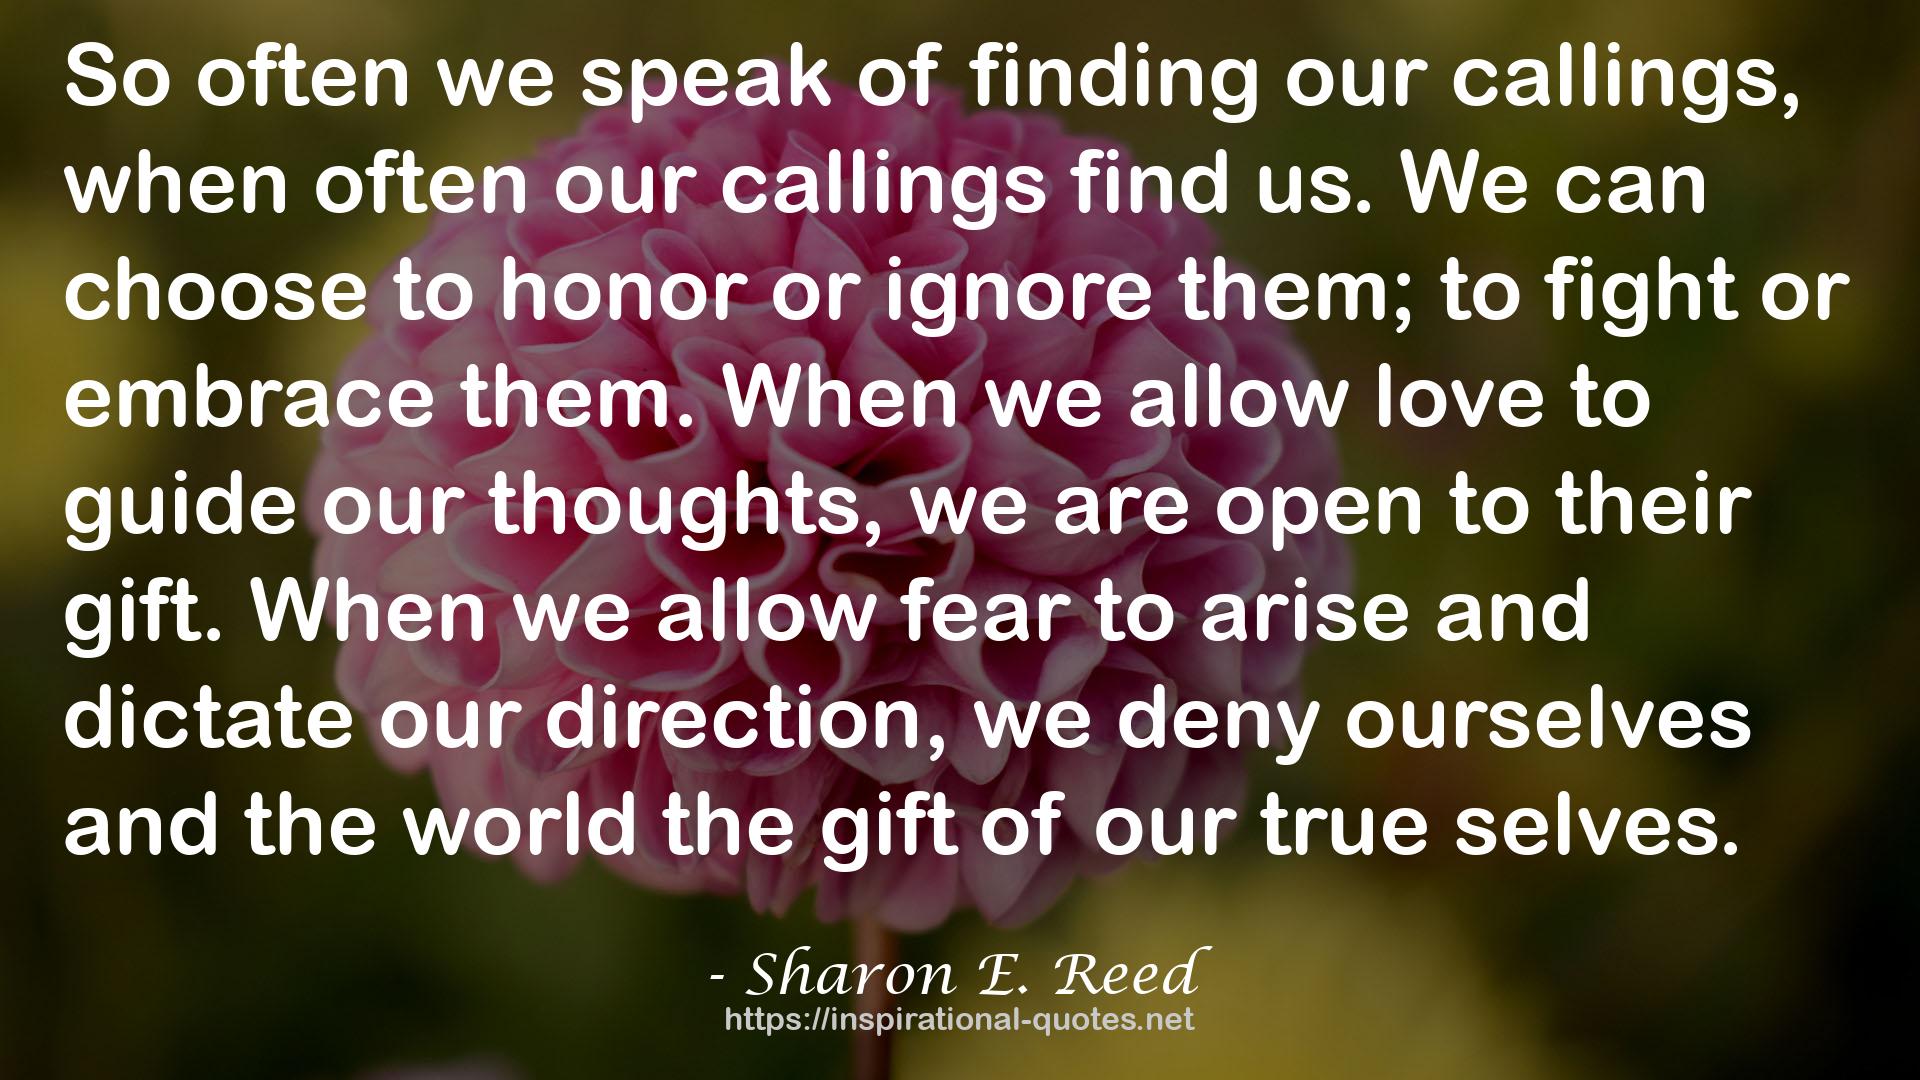 Sharon E. Reed QUOTES